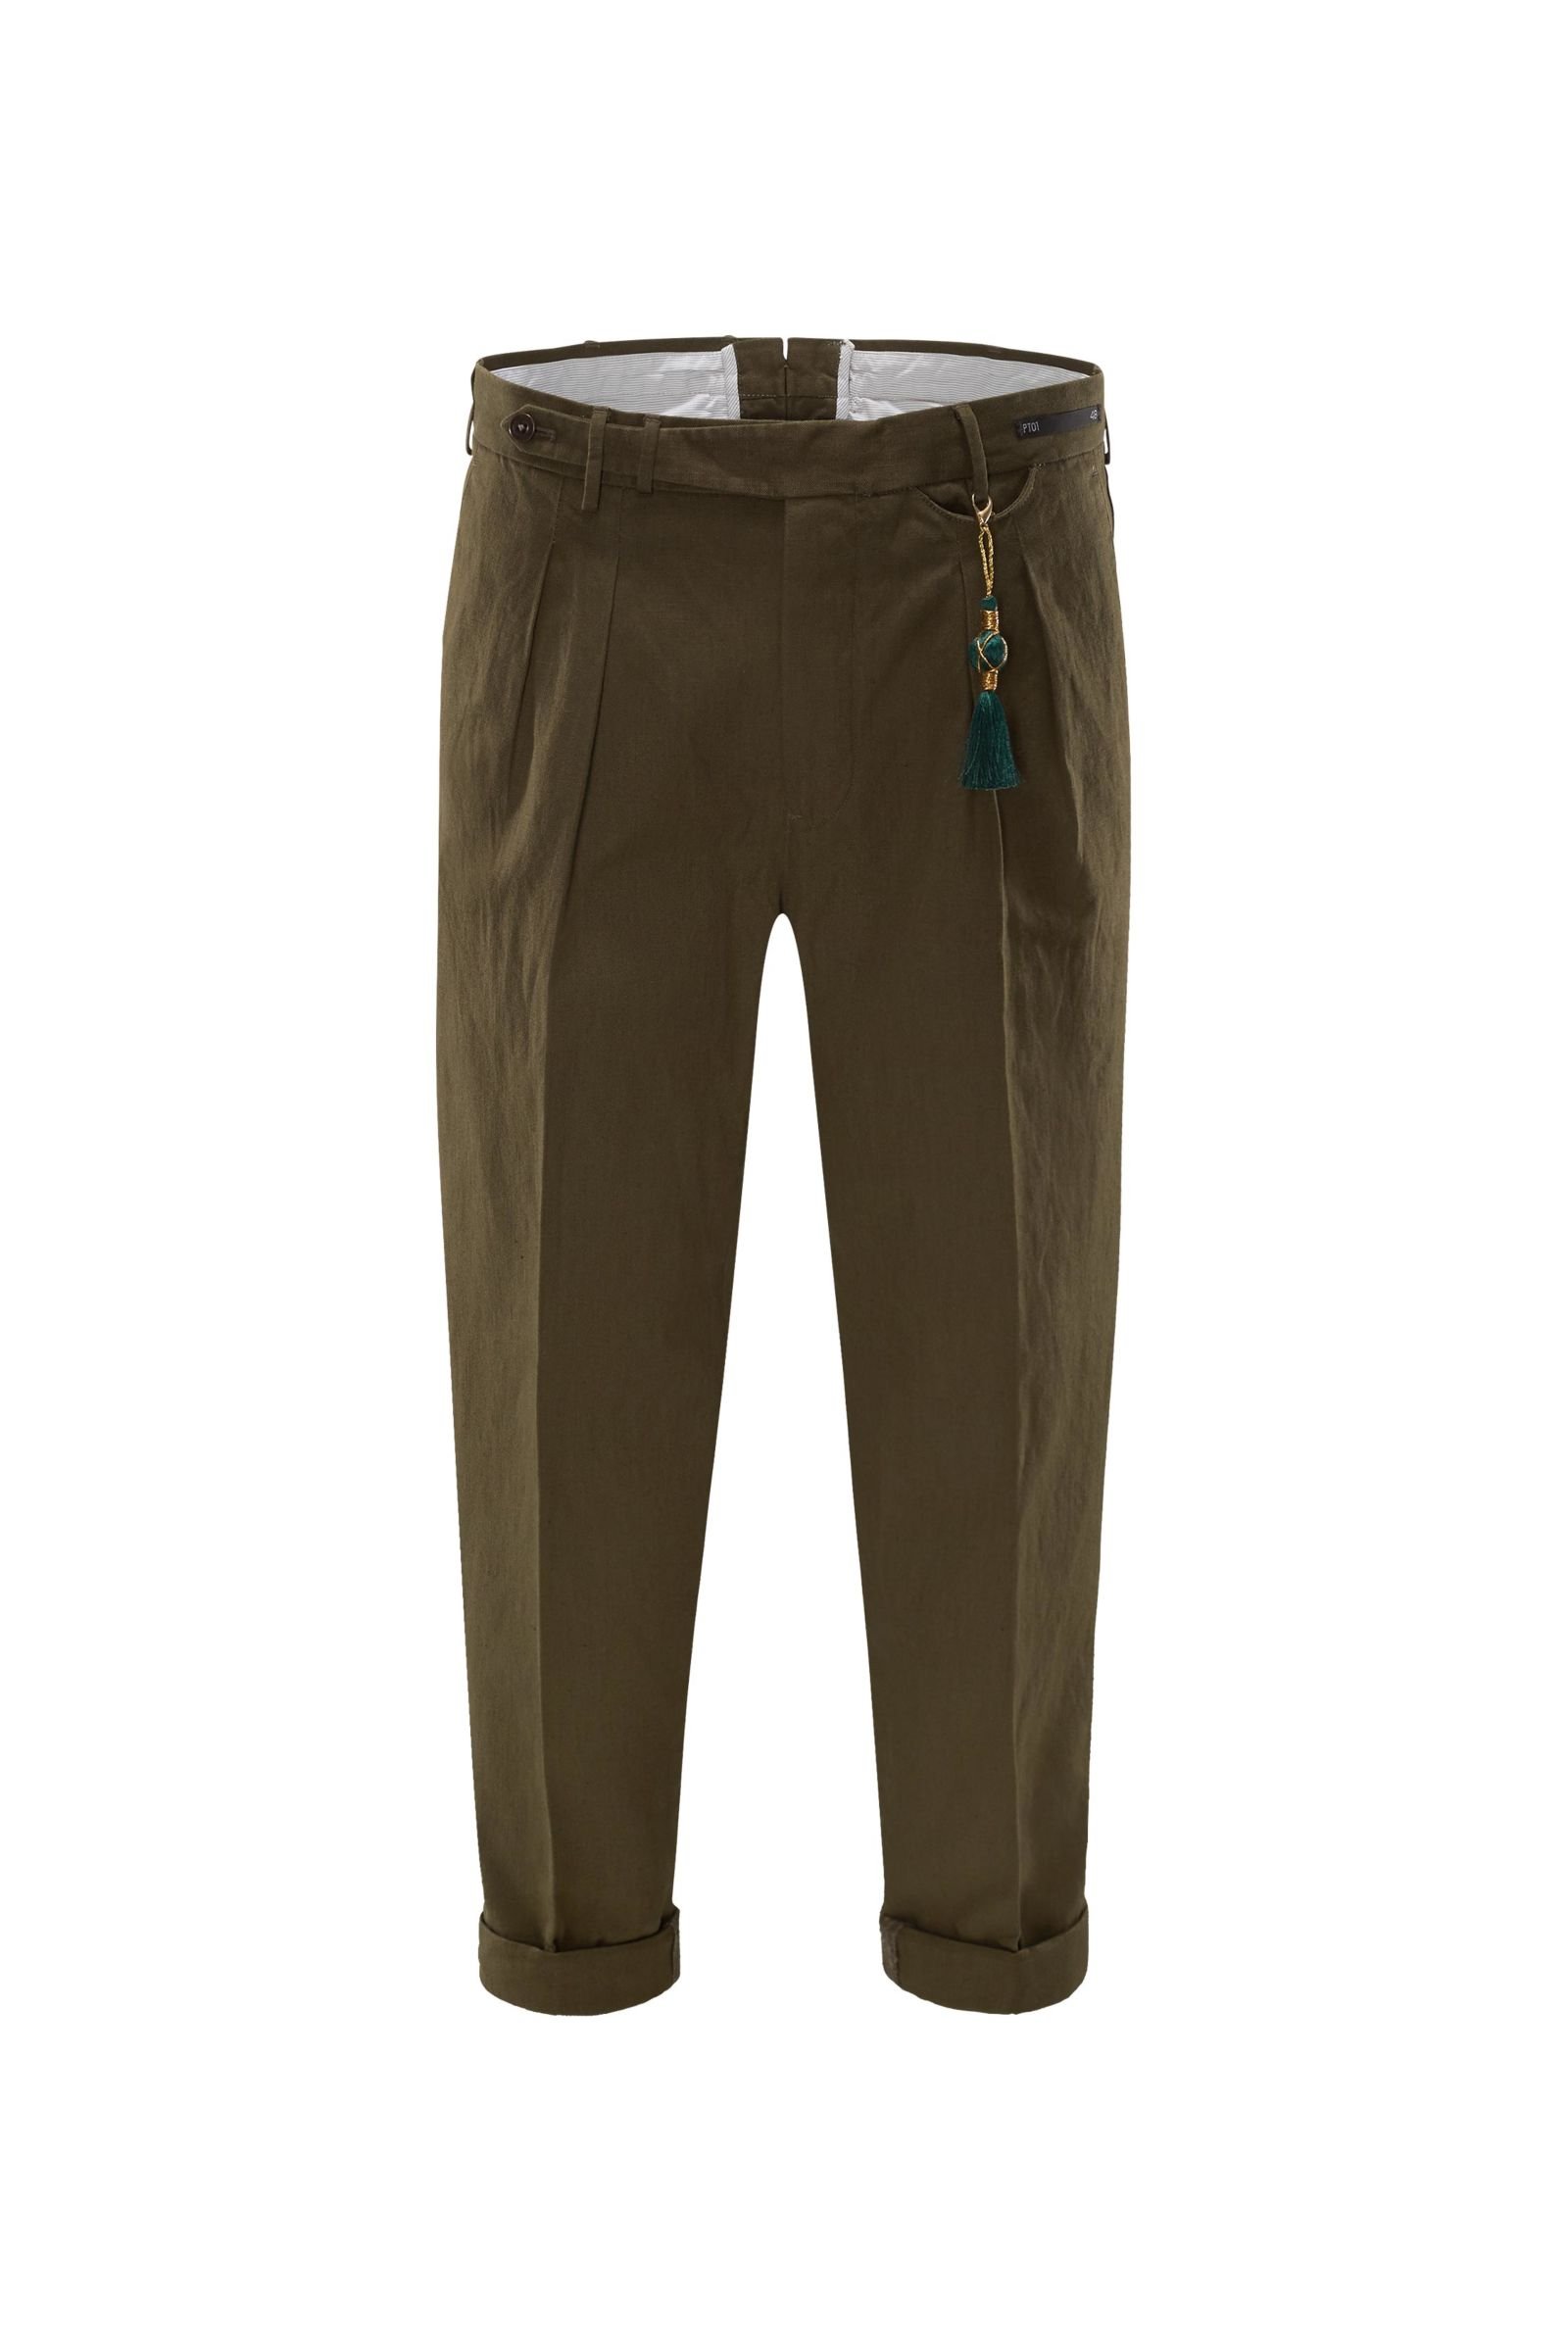 Chambray trousers 'Colonial Party Bombay Hills Carrot Fit' olive